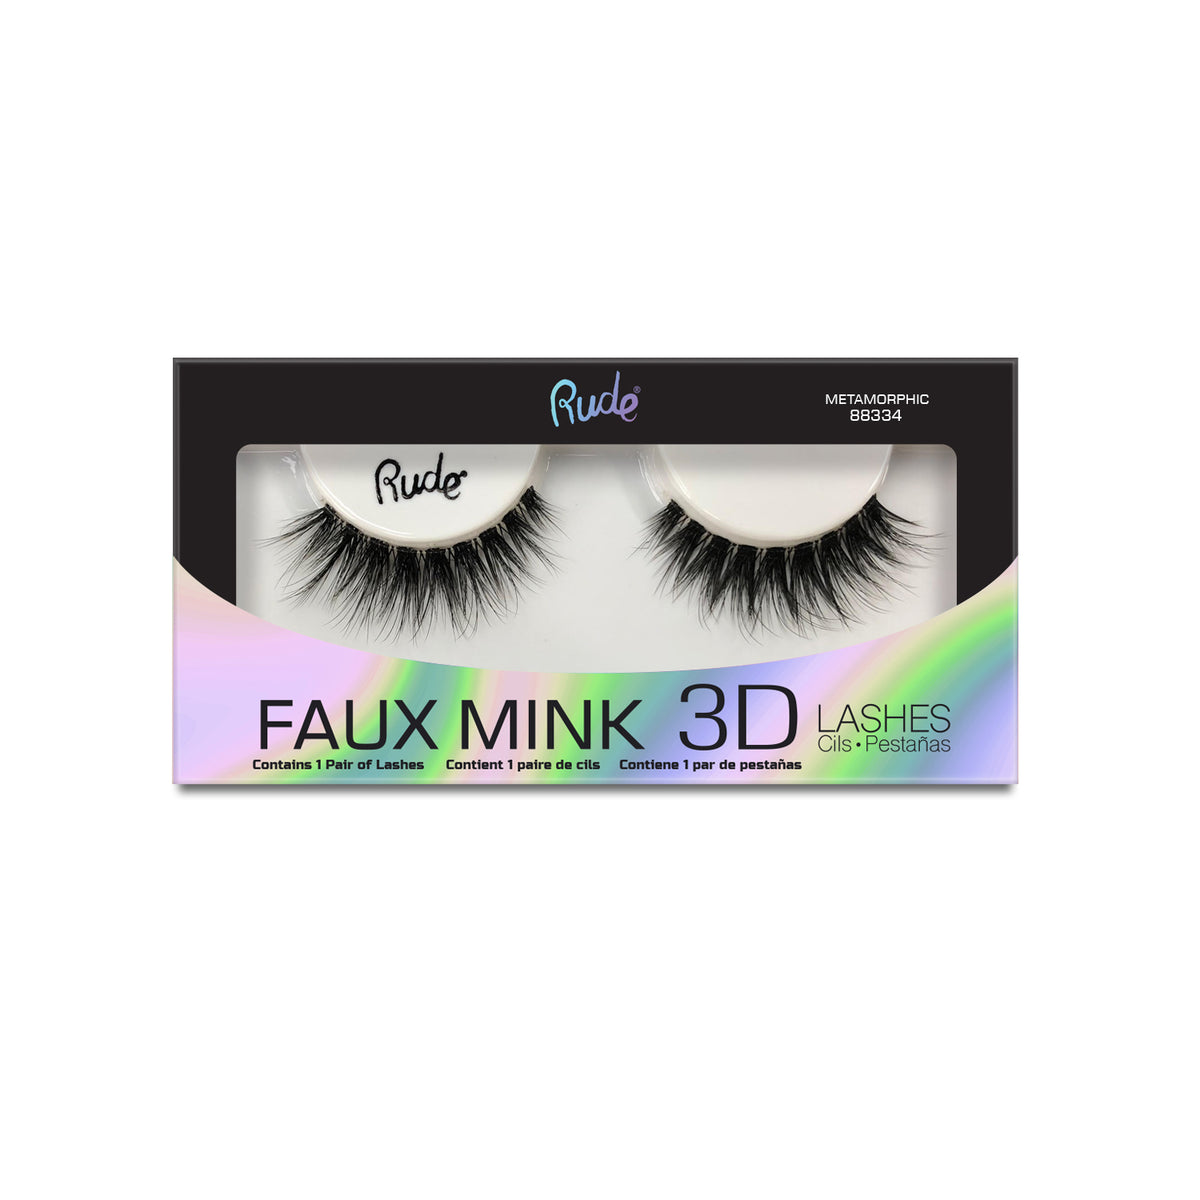 3D Lashes | Full and Fluffy Faux Mink Lashes Metamorphic